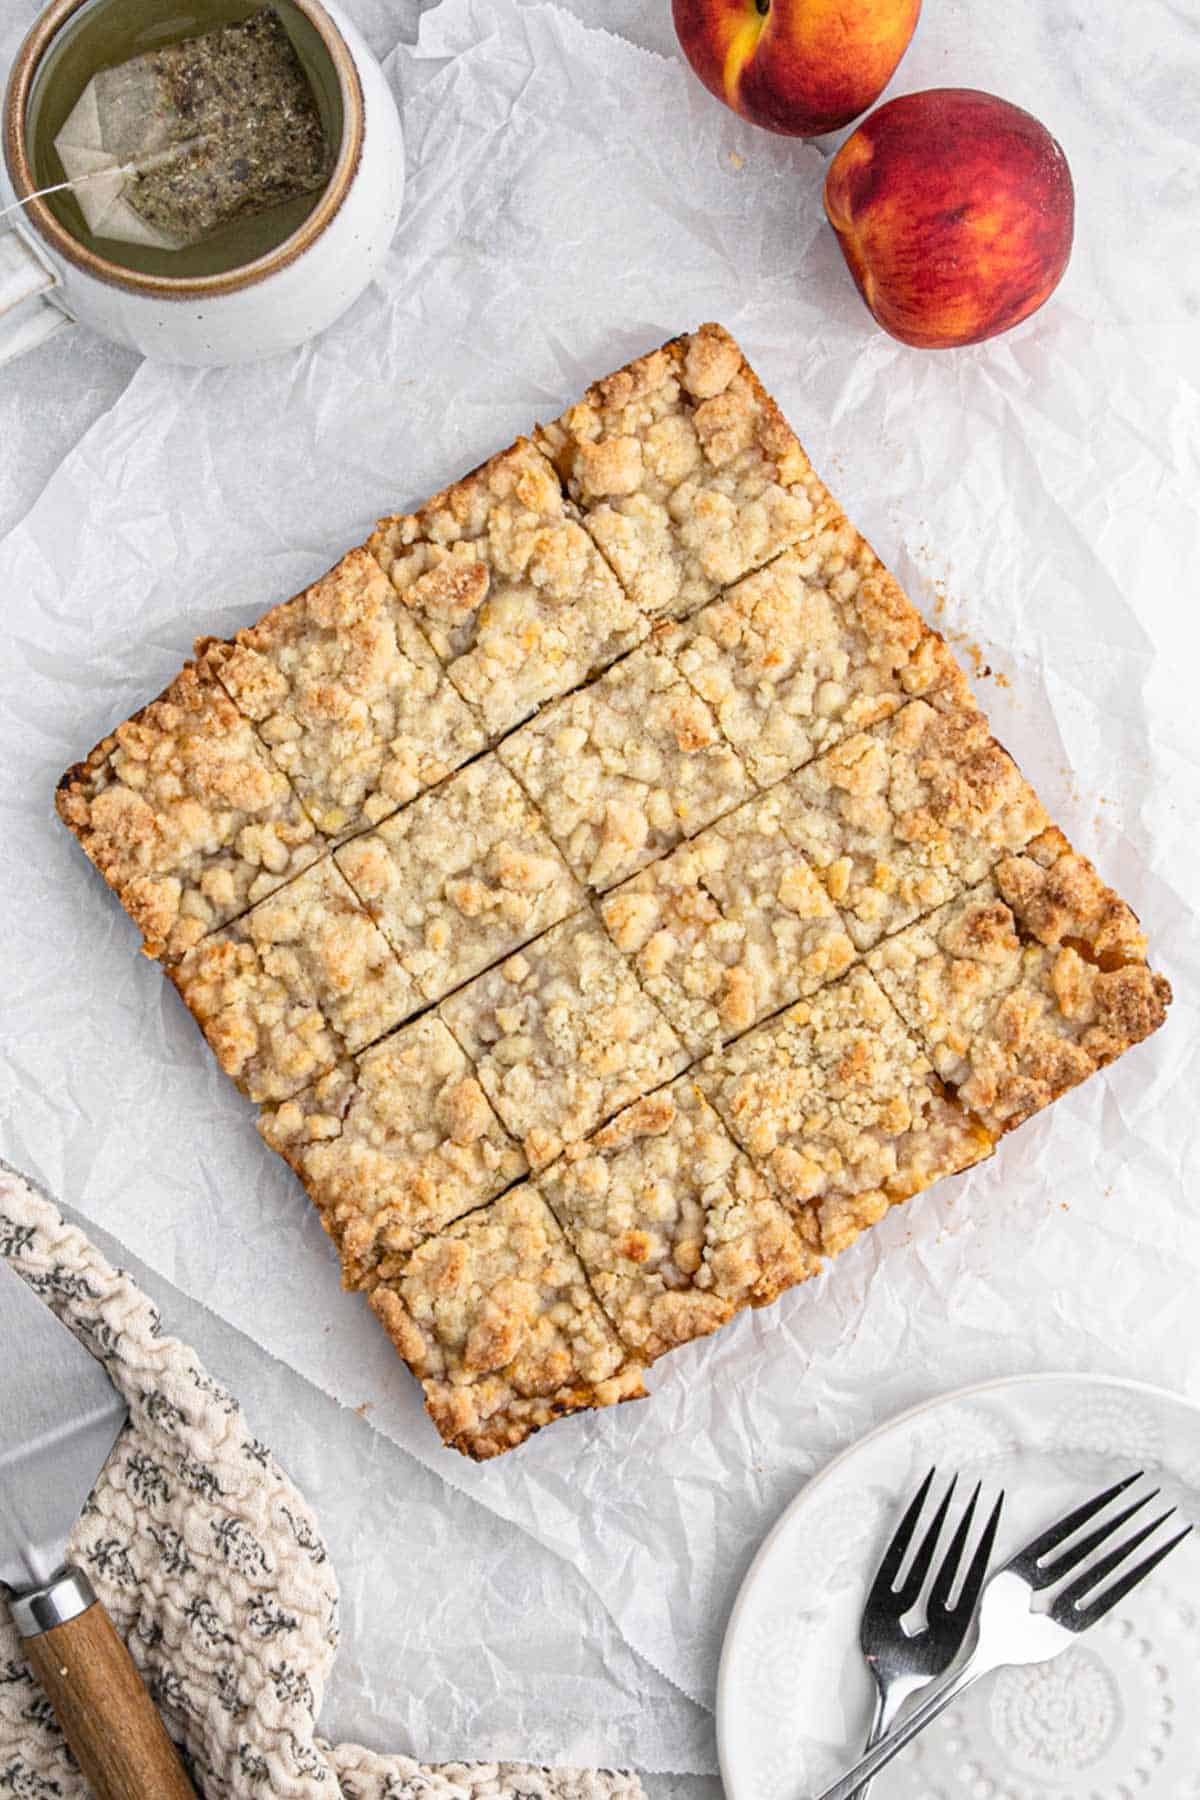 Peach bars removed from the pan and cut into squares on a piece of parchment.